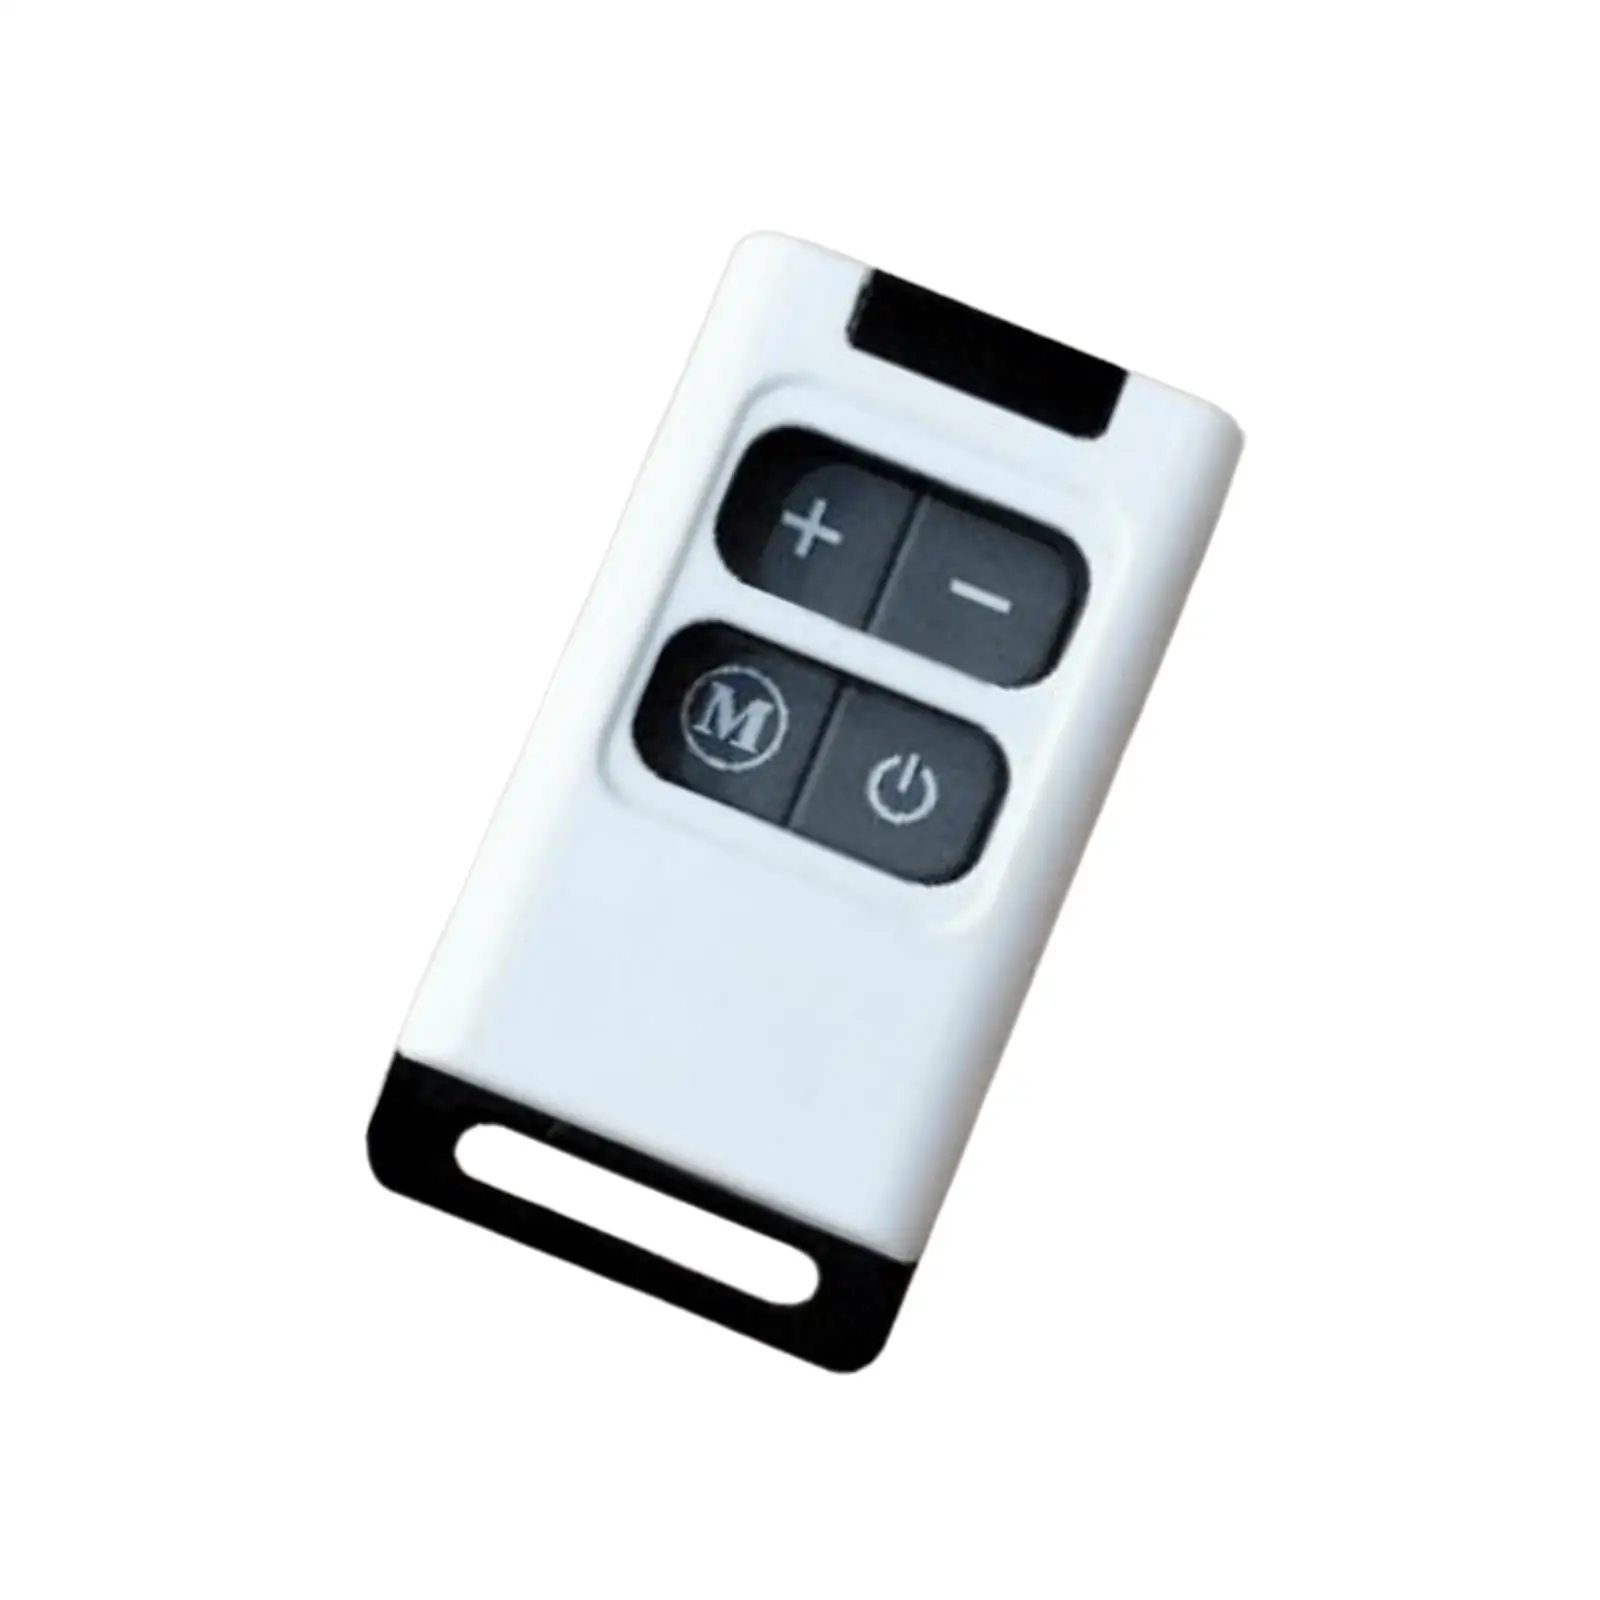 Car Parking Heater Remote Control Universal for Heater Controller Boat RV Motorhomes Car Diesels Air Heater Parking Heater